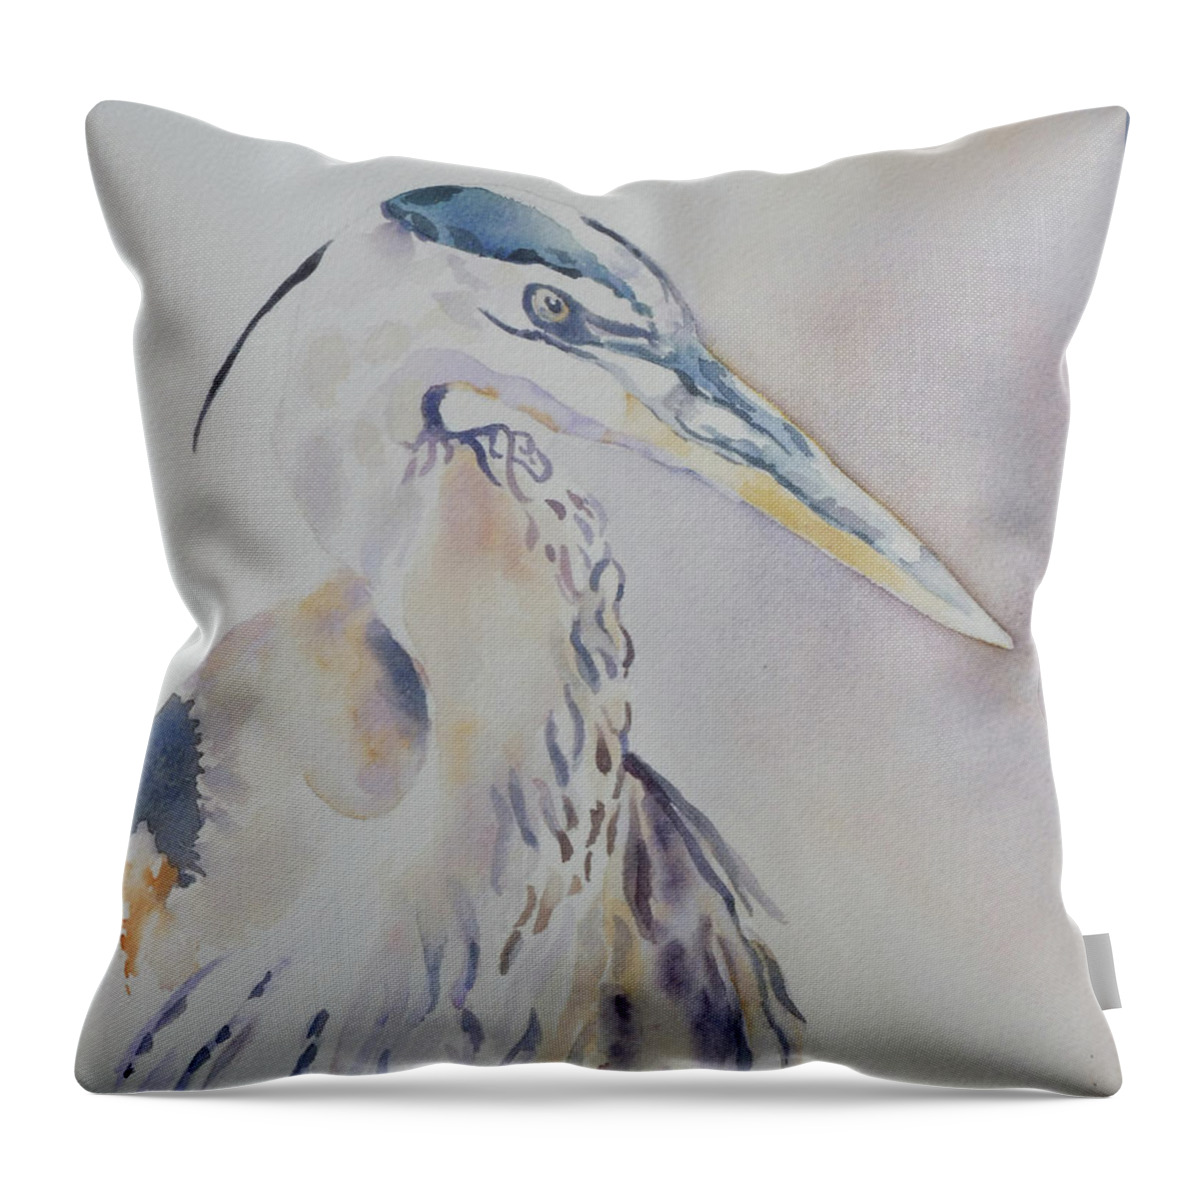 Great Throw Pillow featuring the painting Watching by Mary Haley-Rocks